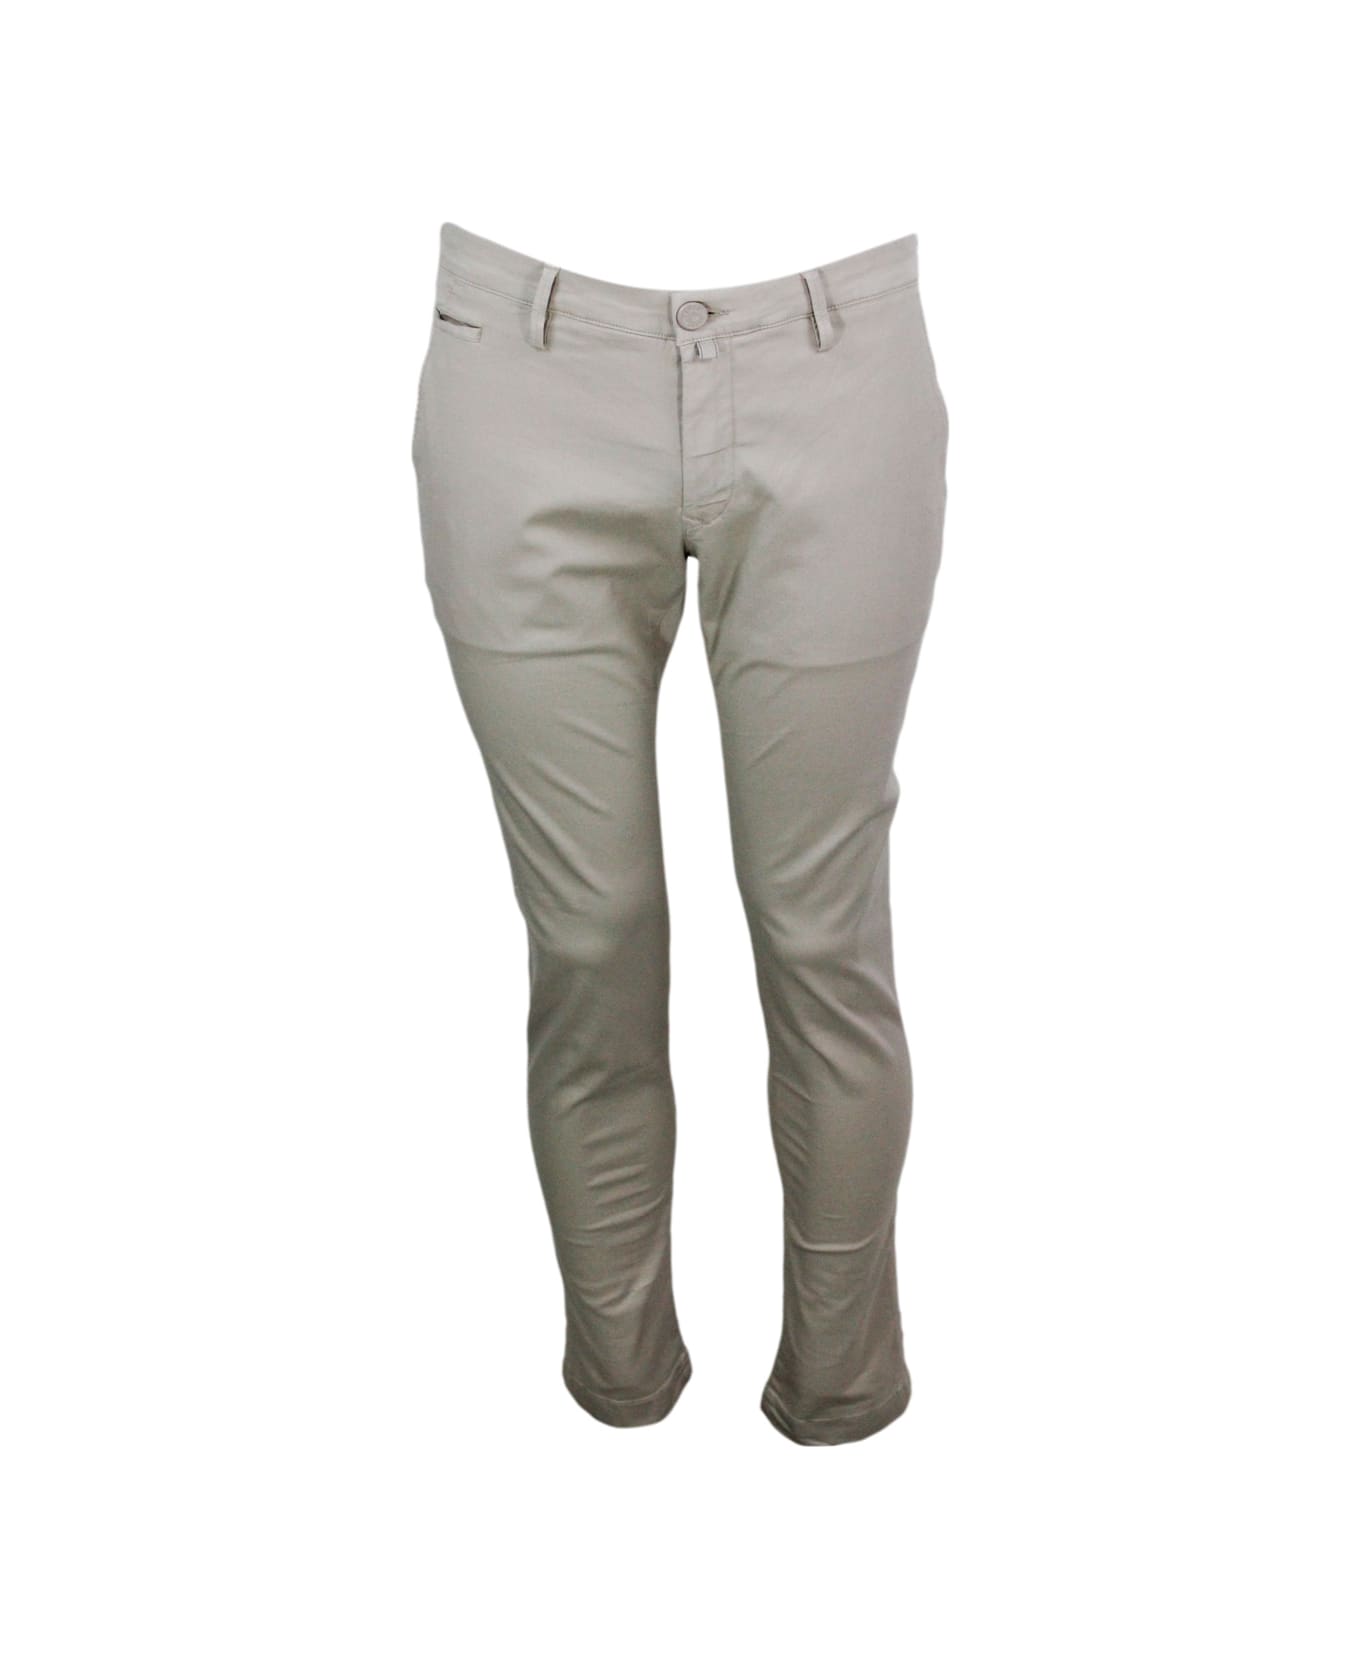 Jacob Cohen Luxury Edition Bobby Chino Trousers In Soft Stretch Cotton With Slant Pockets With Zip And Button Closure And Lacquered Button - Beige